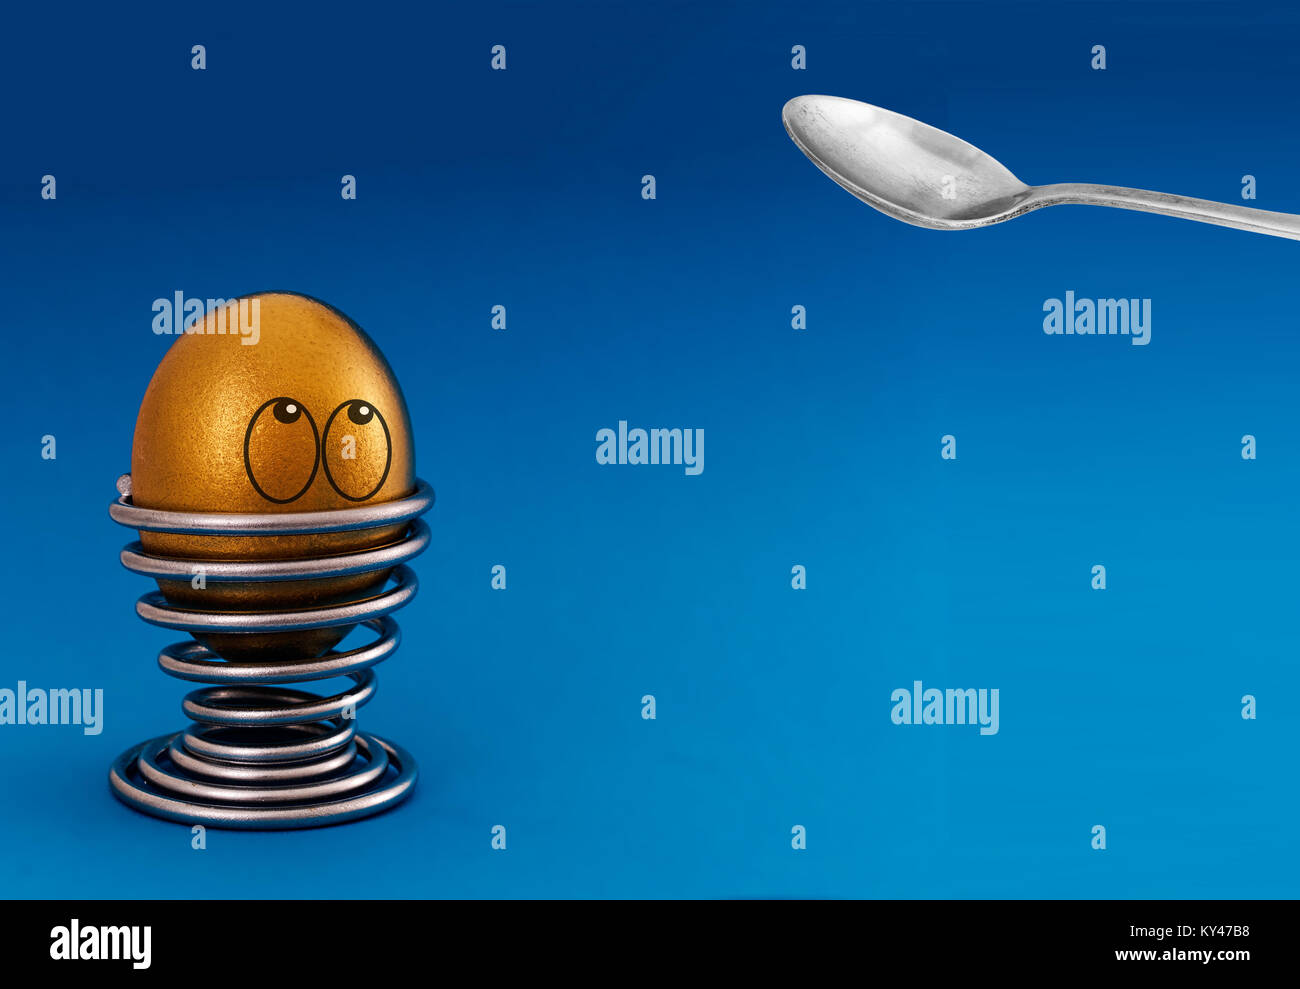 Cracking gold egg. Financial investment metaphor. Stock Photo